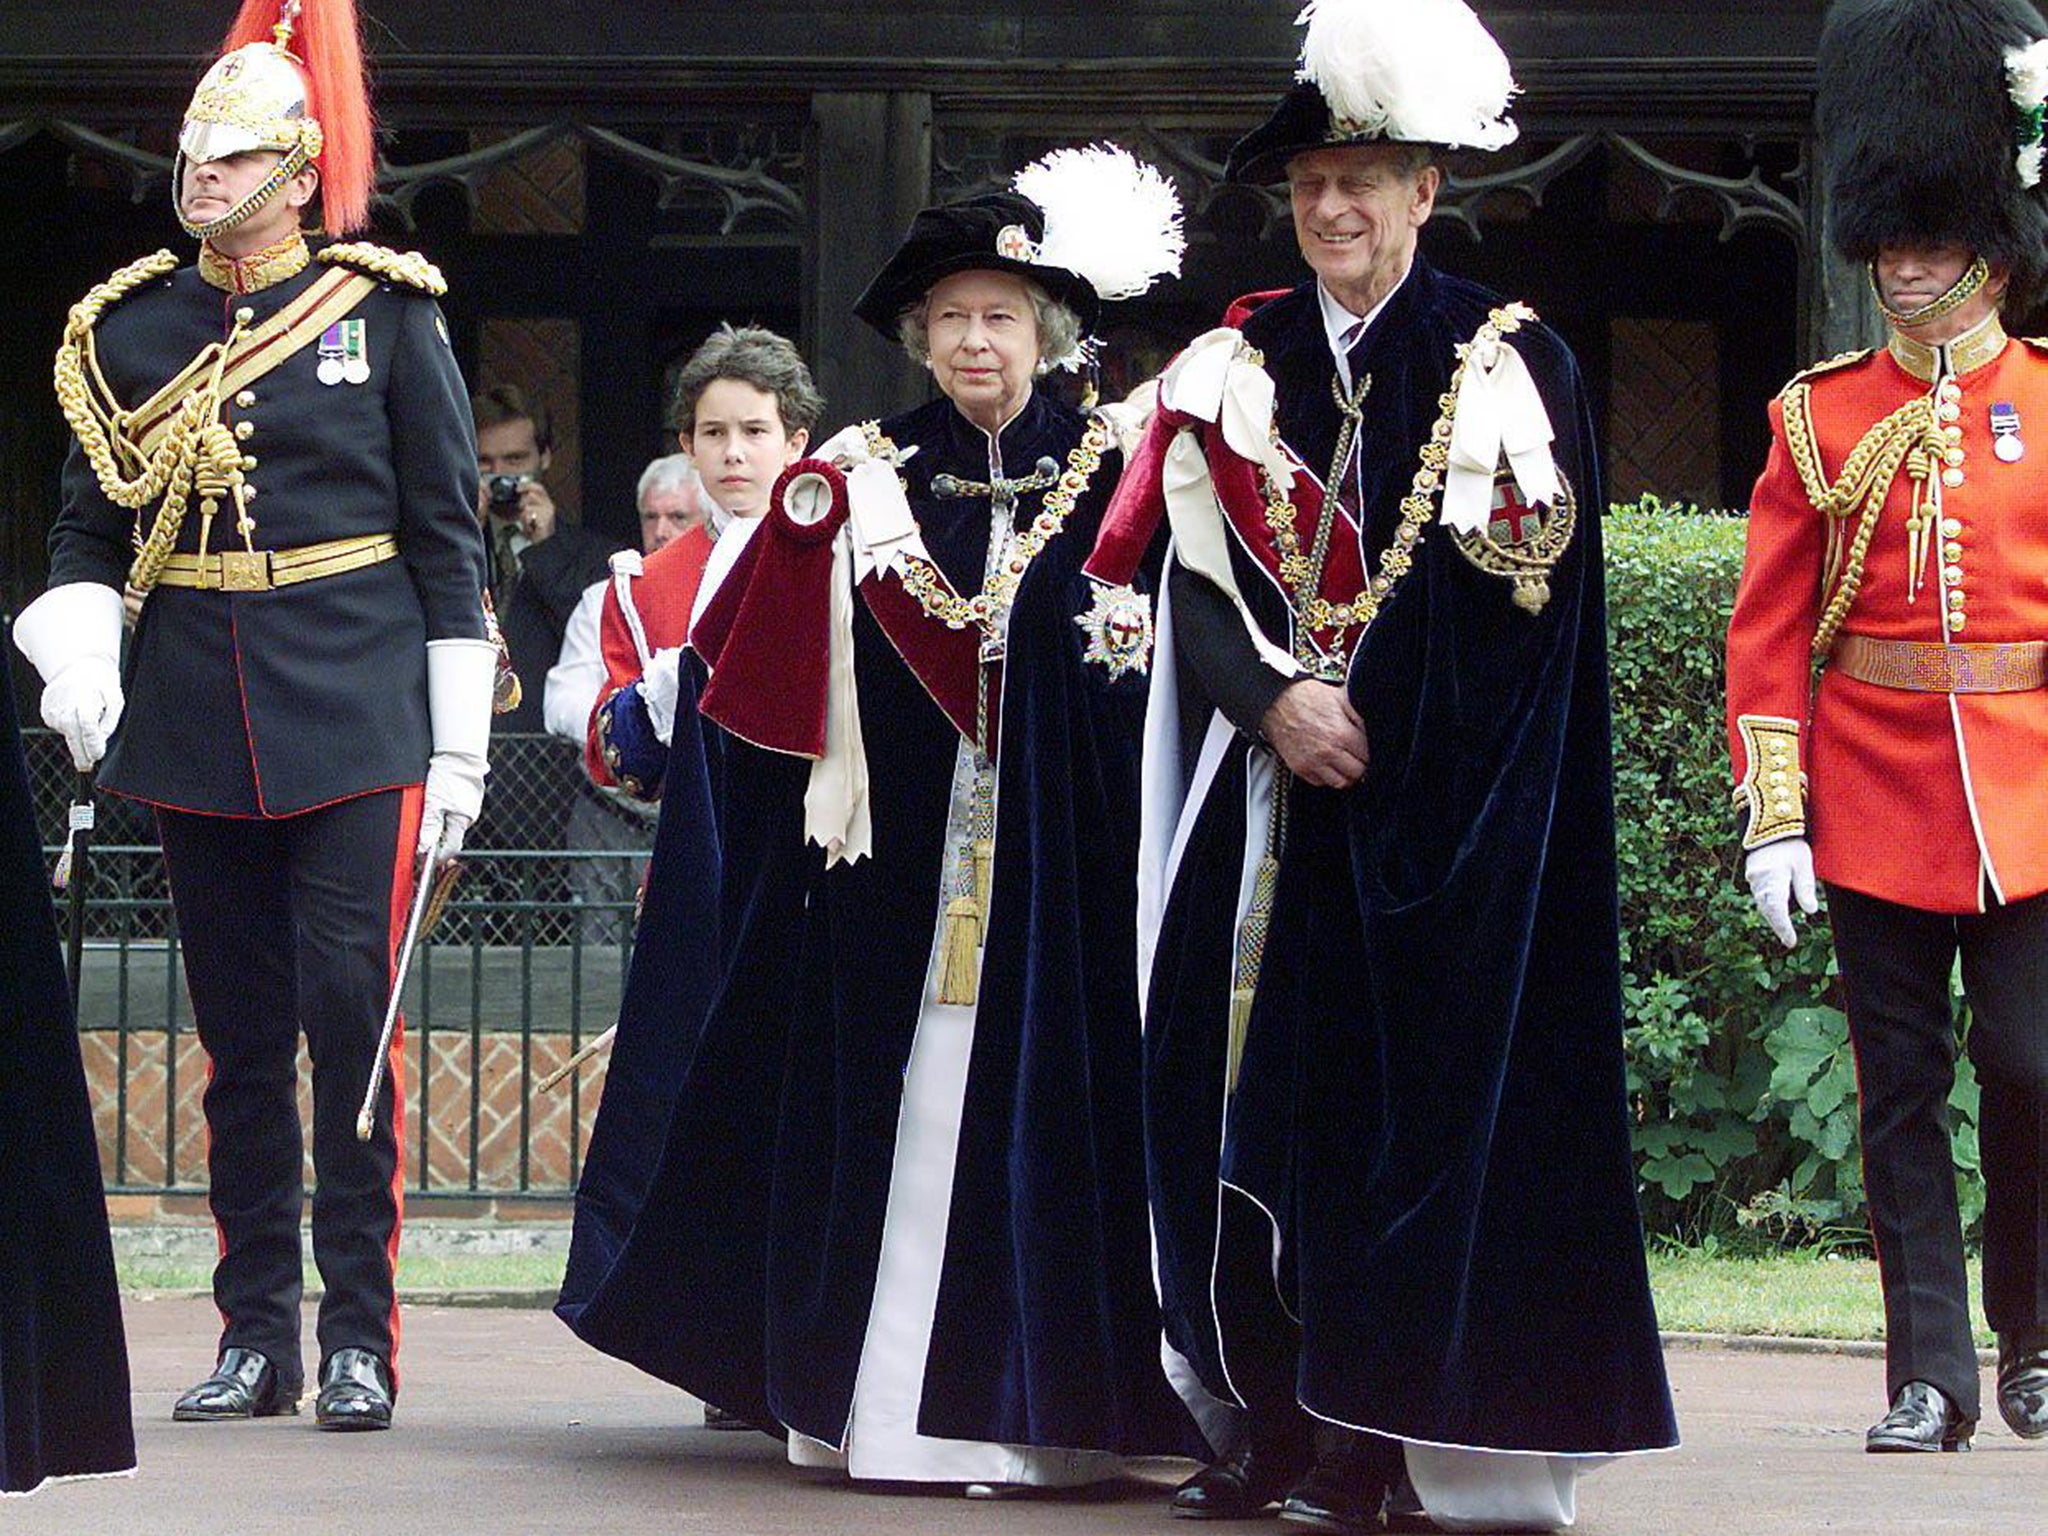 Queen Elizabeth II, accompanied by the Duke of Edinburgh, make their way into St. George's Chapel at Windsor for the annual Garter ceremony, 1999